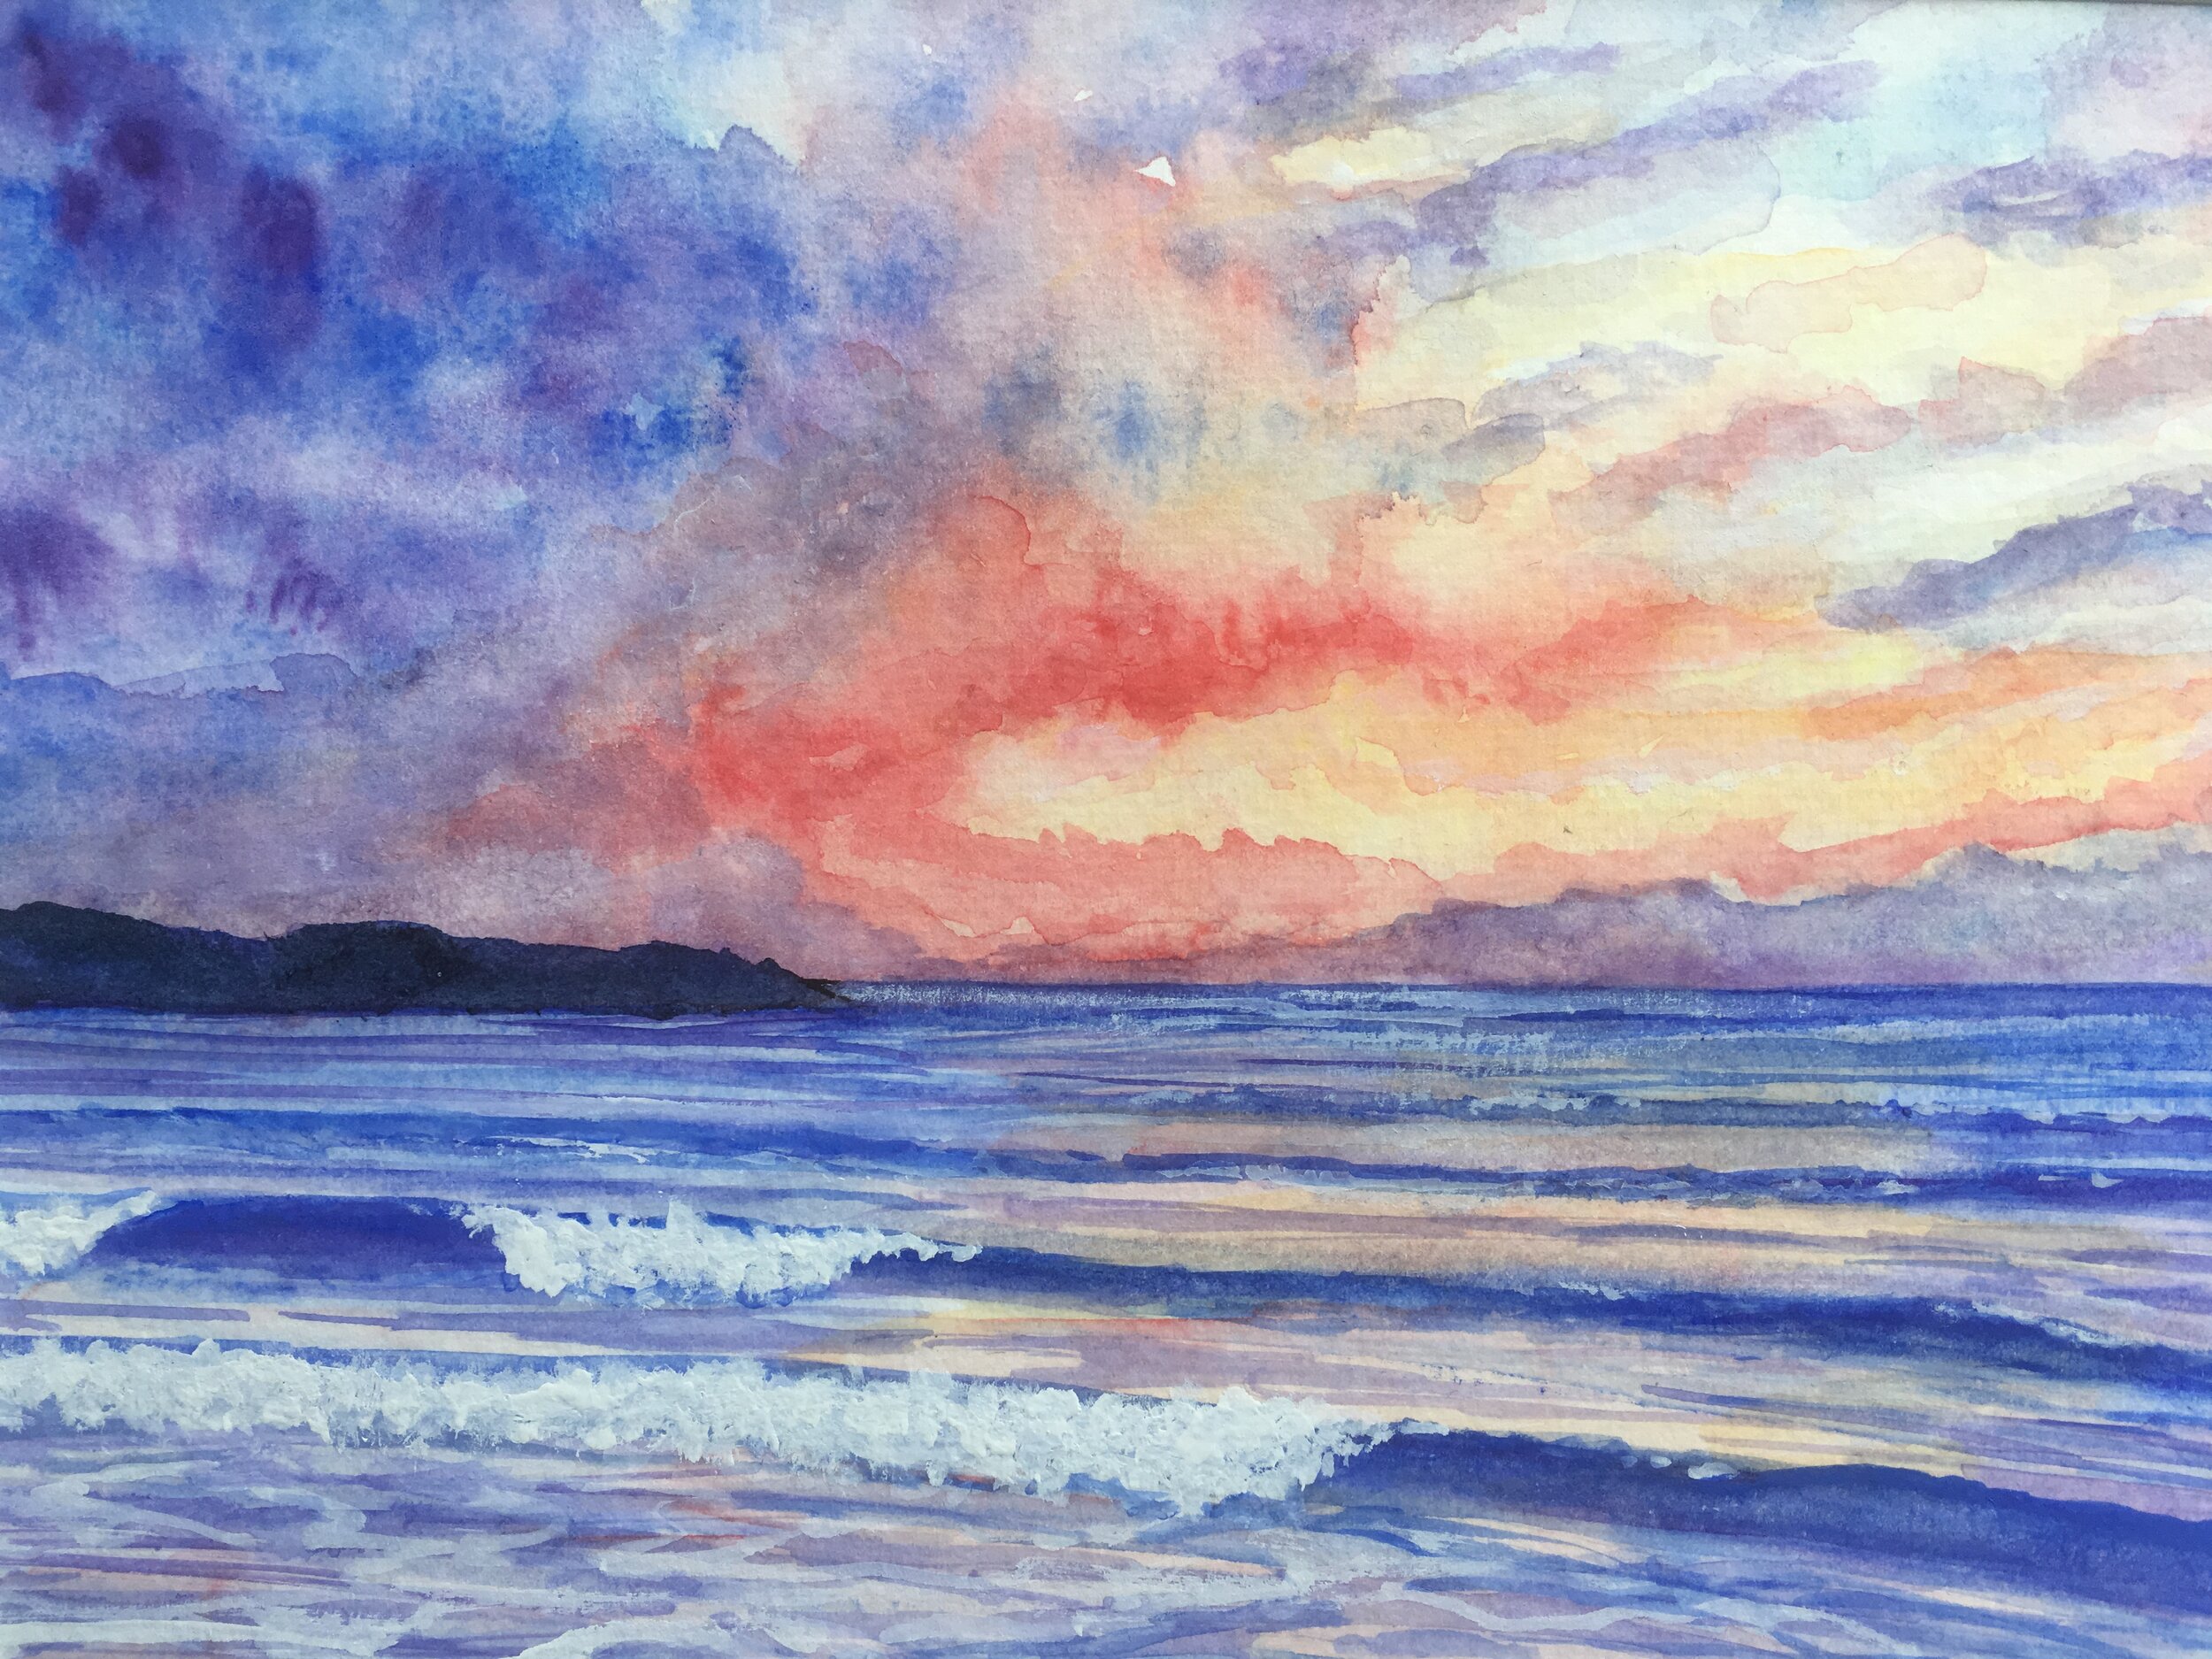 Sunset over Woolacombe, Watercolour on Paper